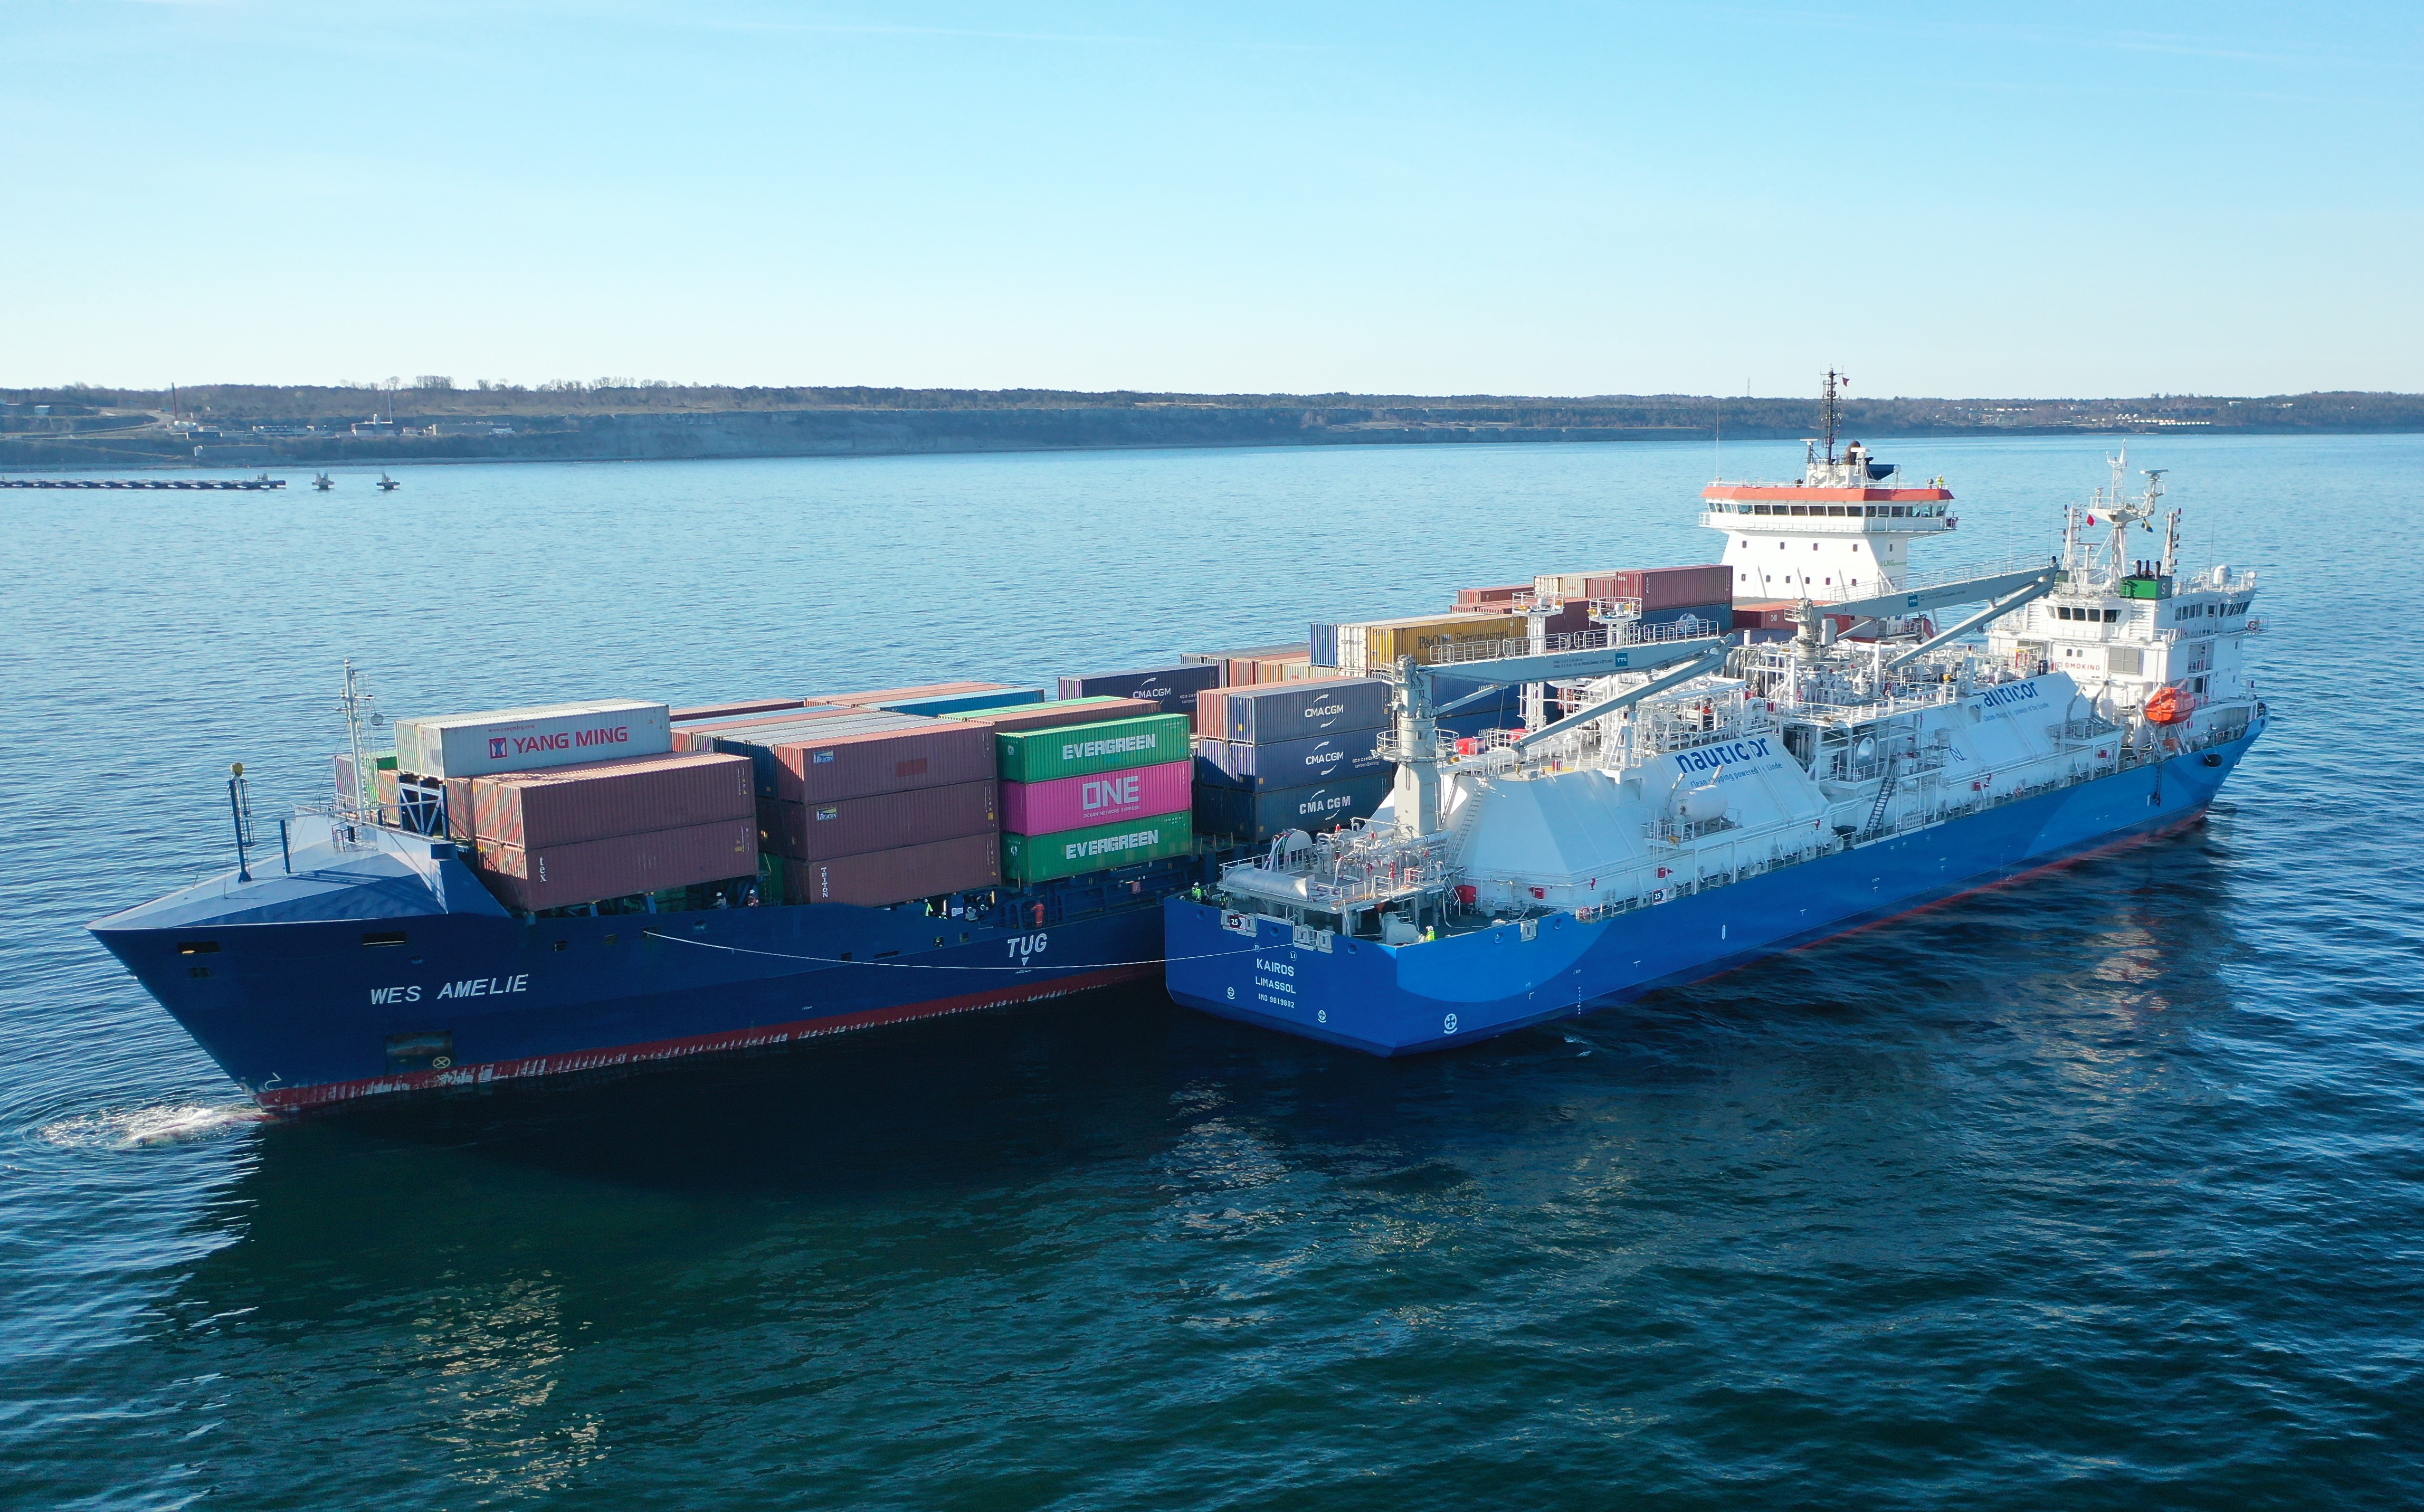 Kairos supplies LNG to Wes Amelie in Visby